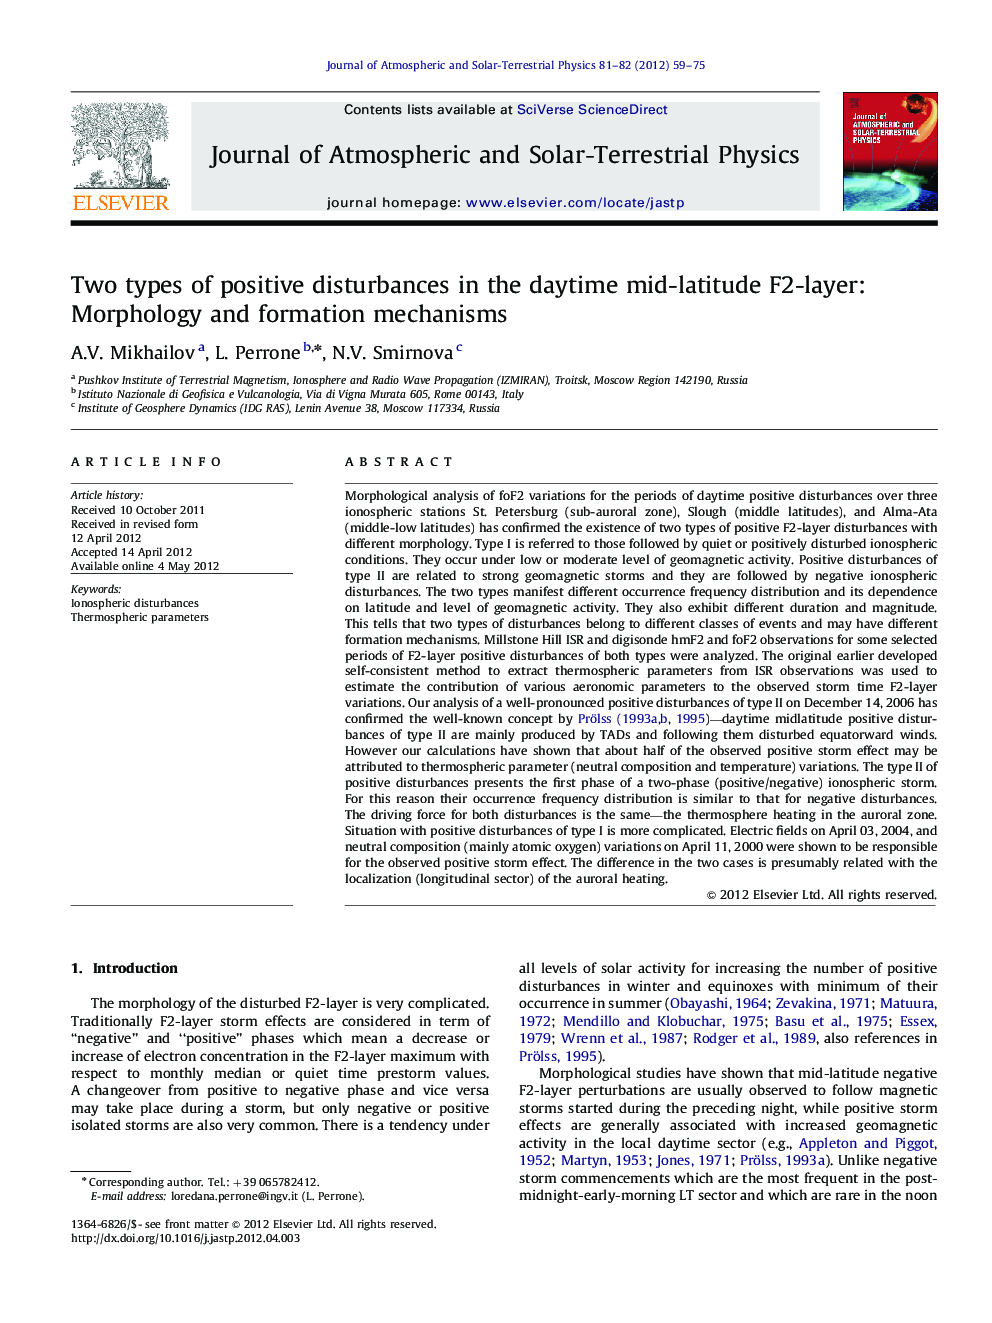 Two types of positive disturbances in the daytime mid-latitude F2-layer: Morphology and formation mechanisms